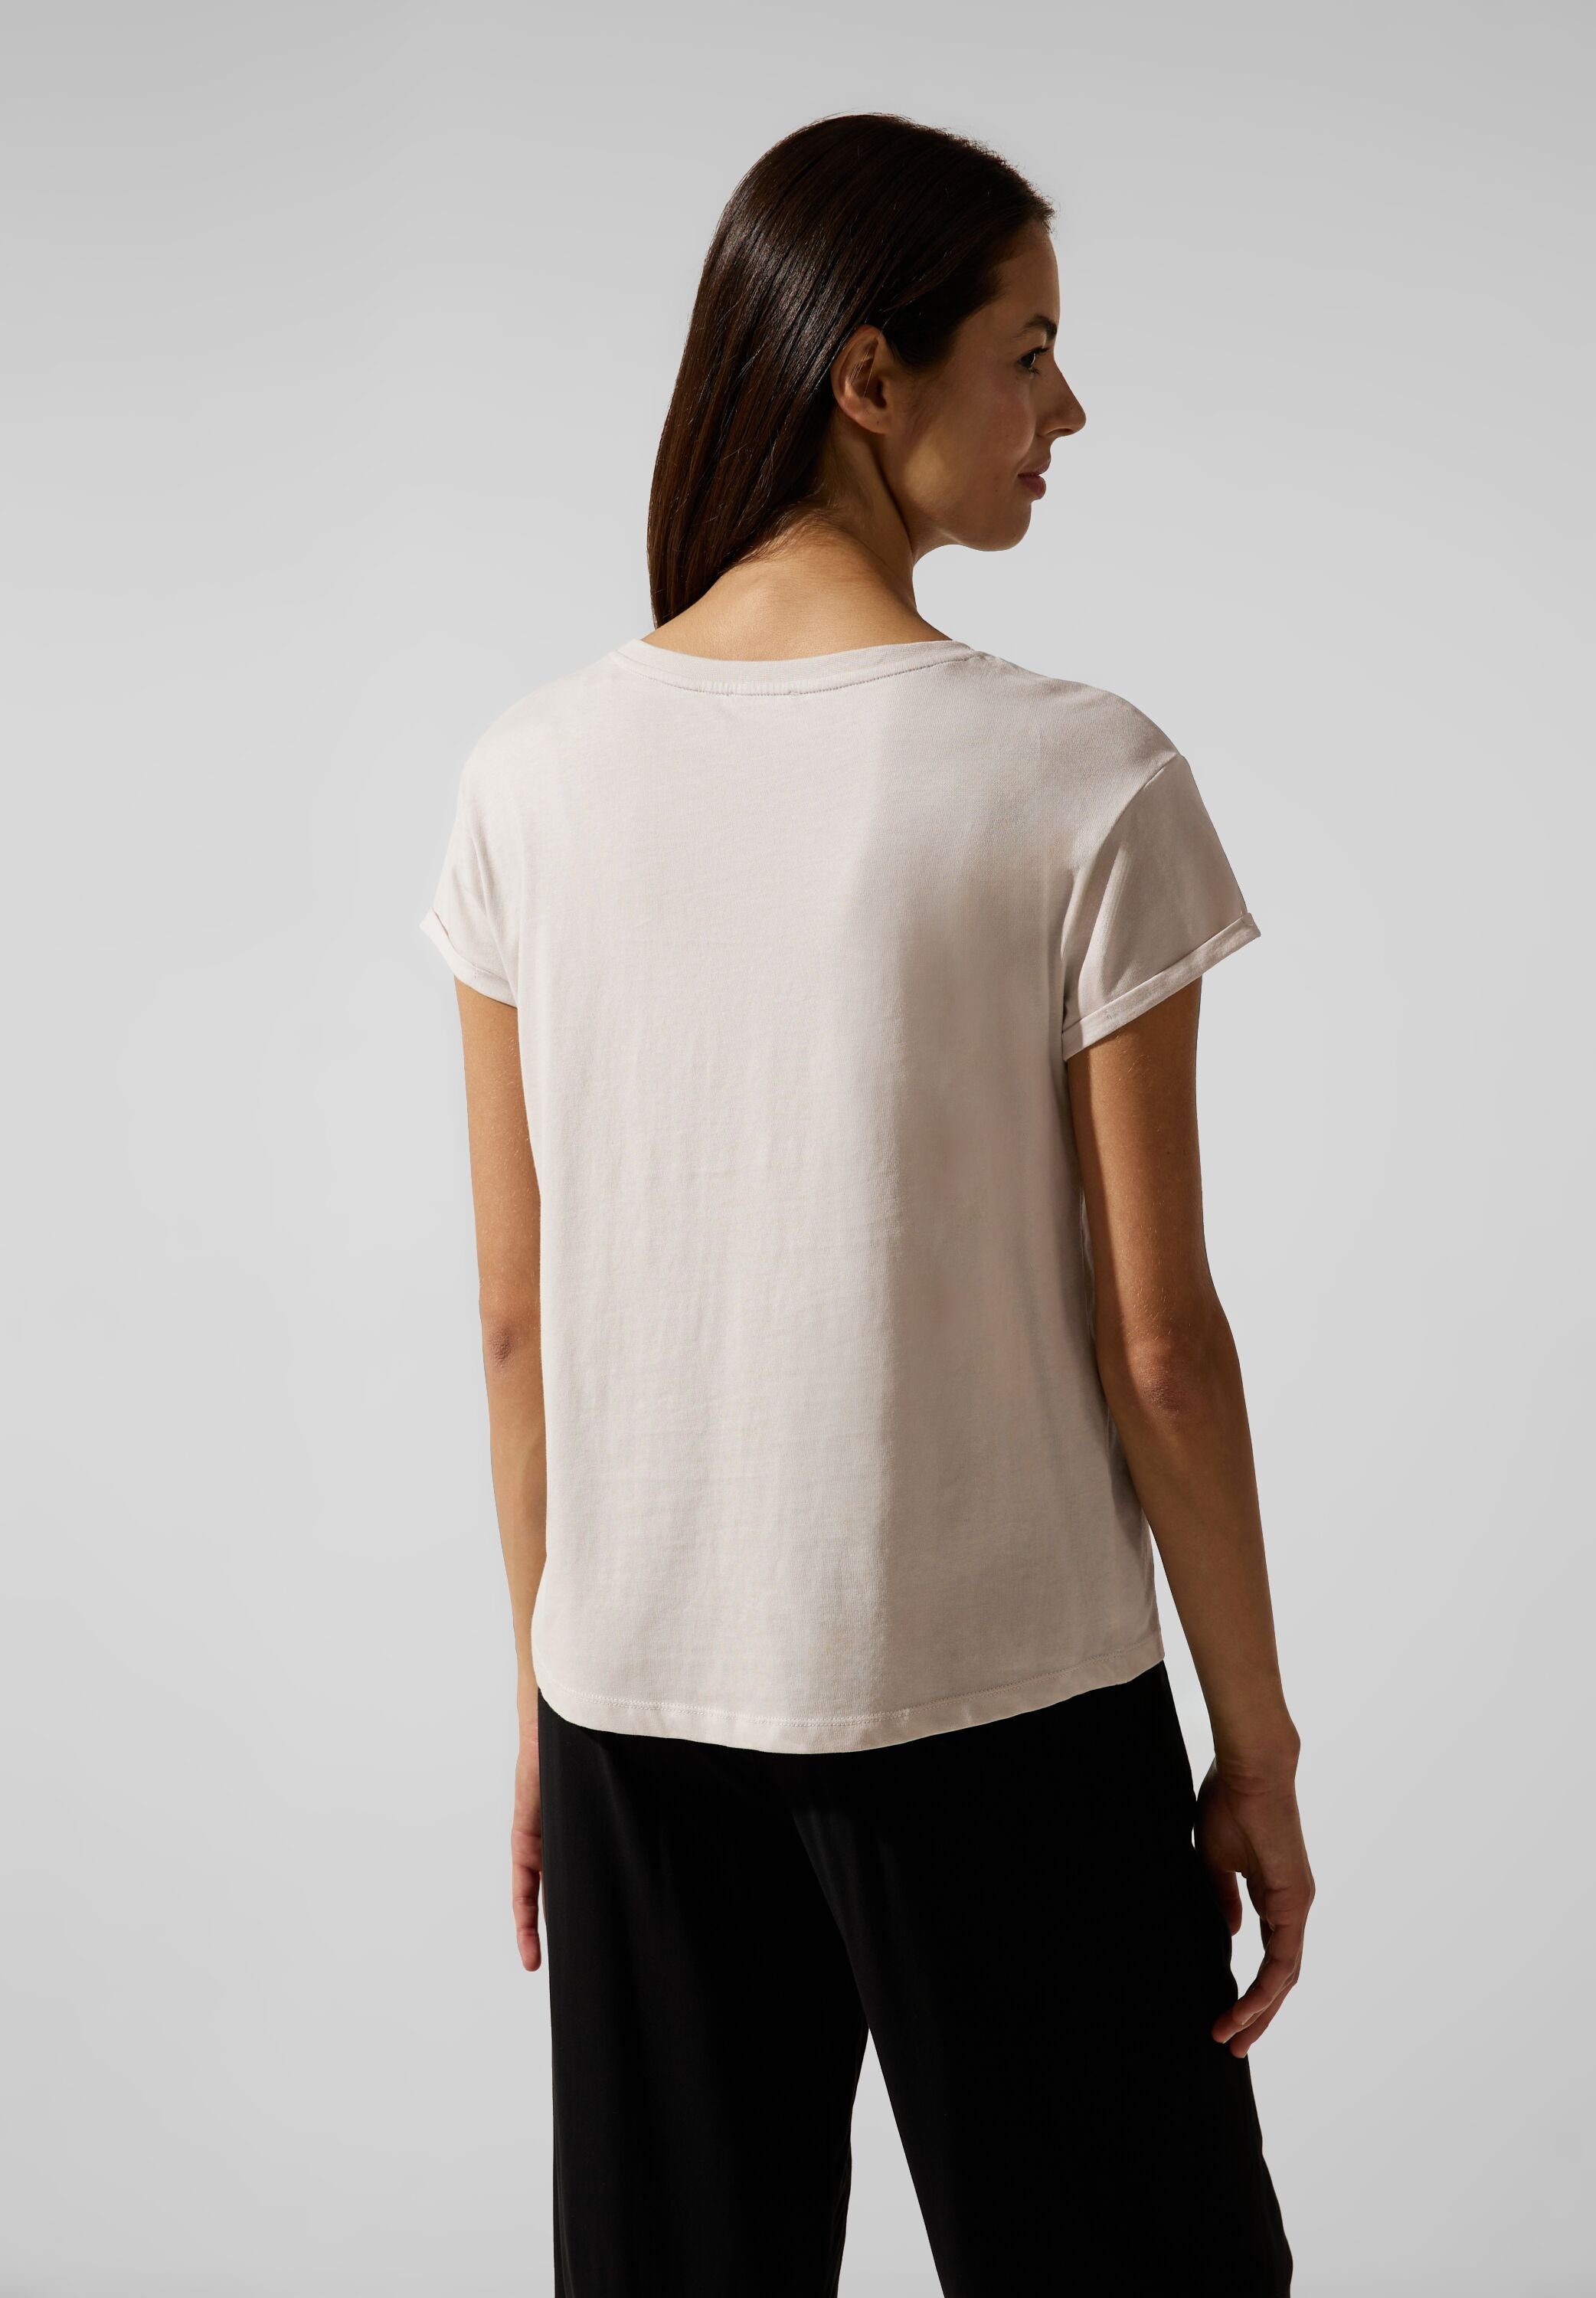 smooth in sand STREET T-Shirt Unifarbe stone ONE